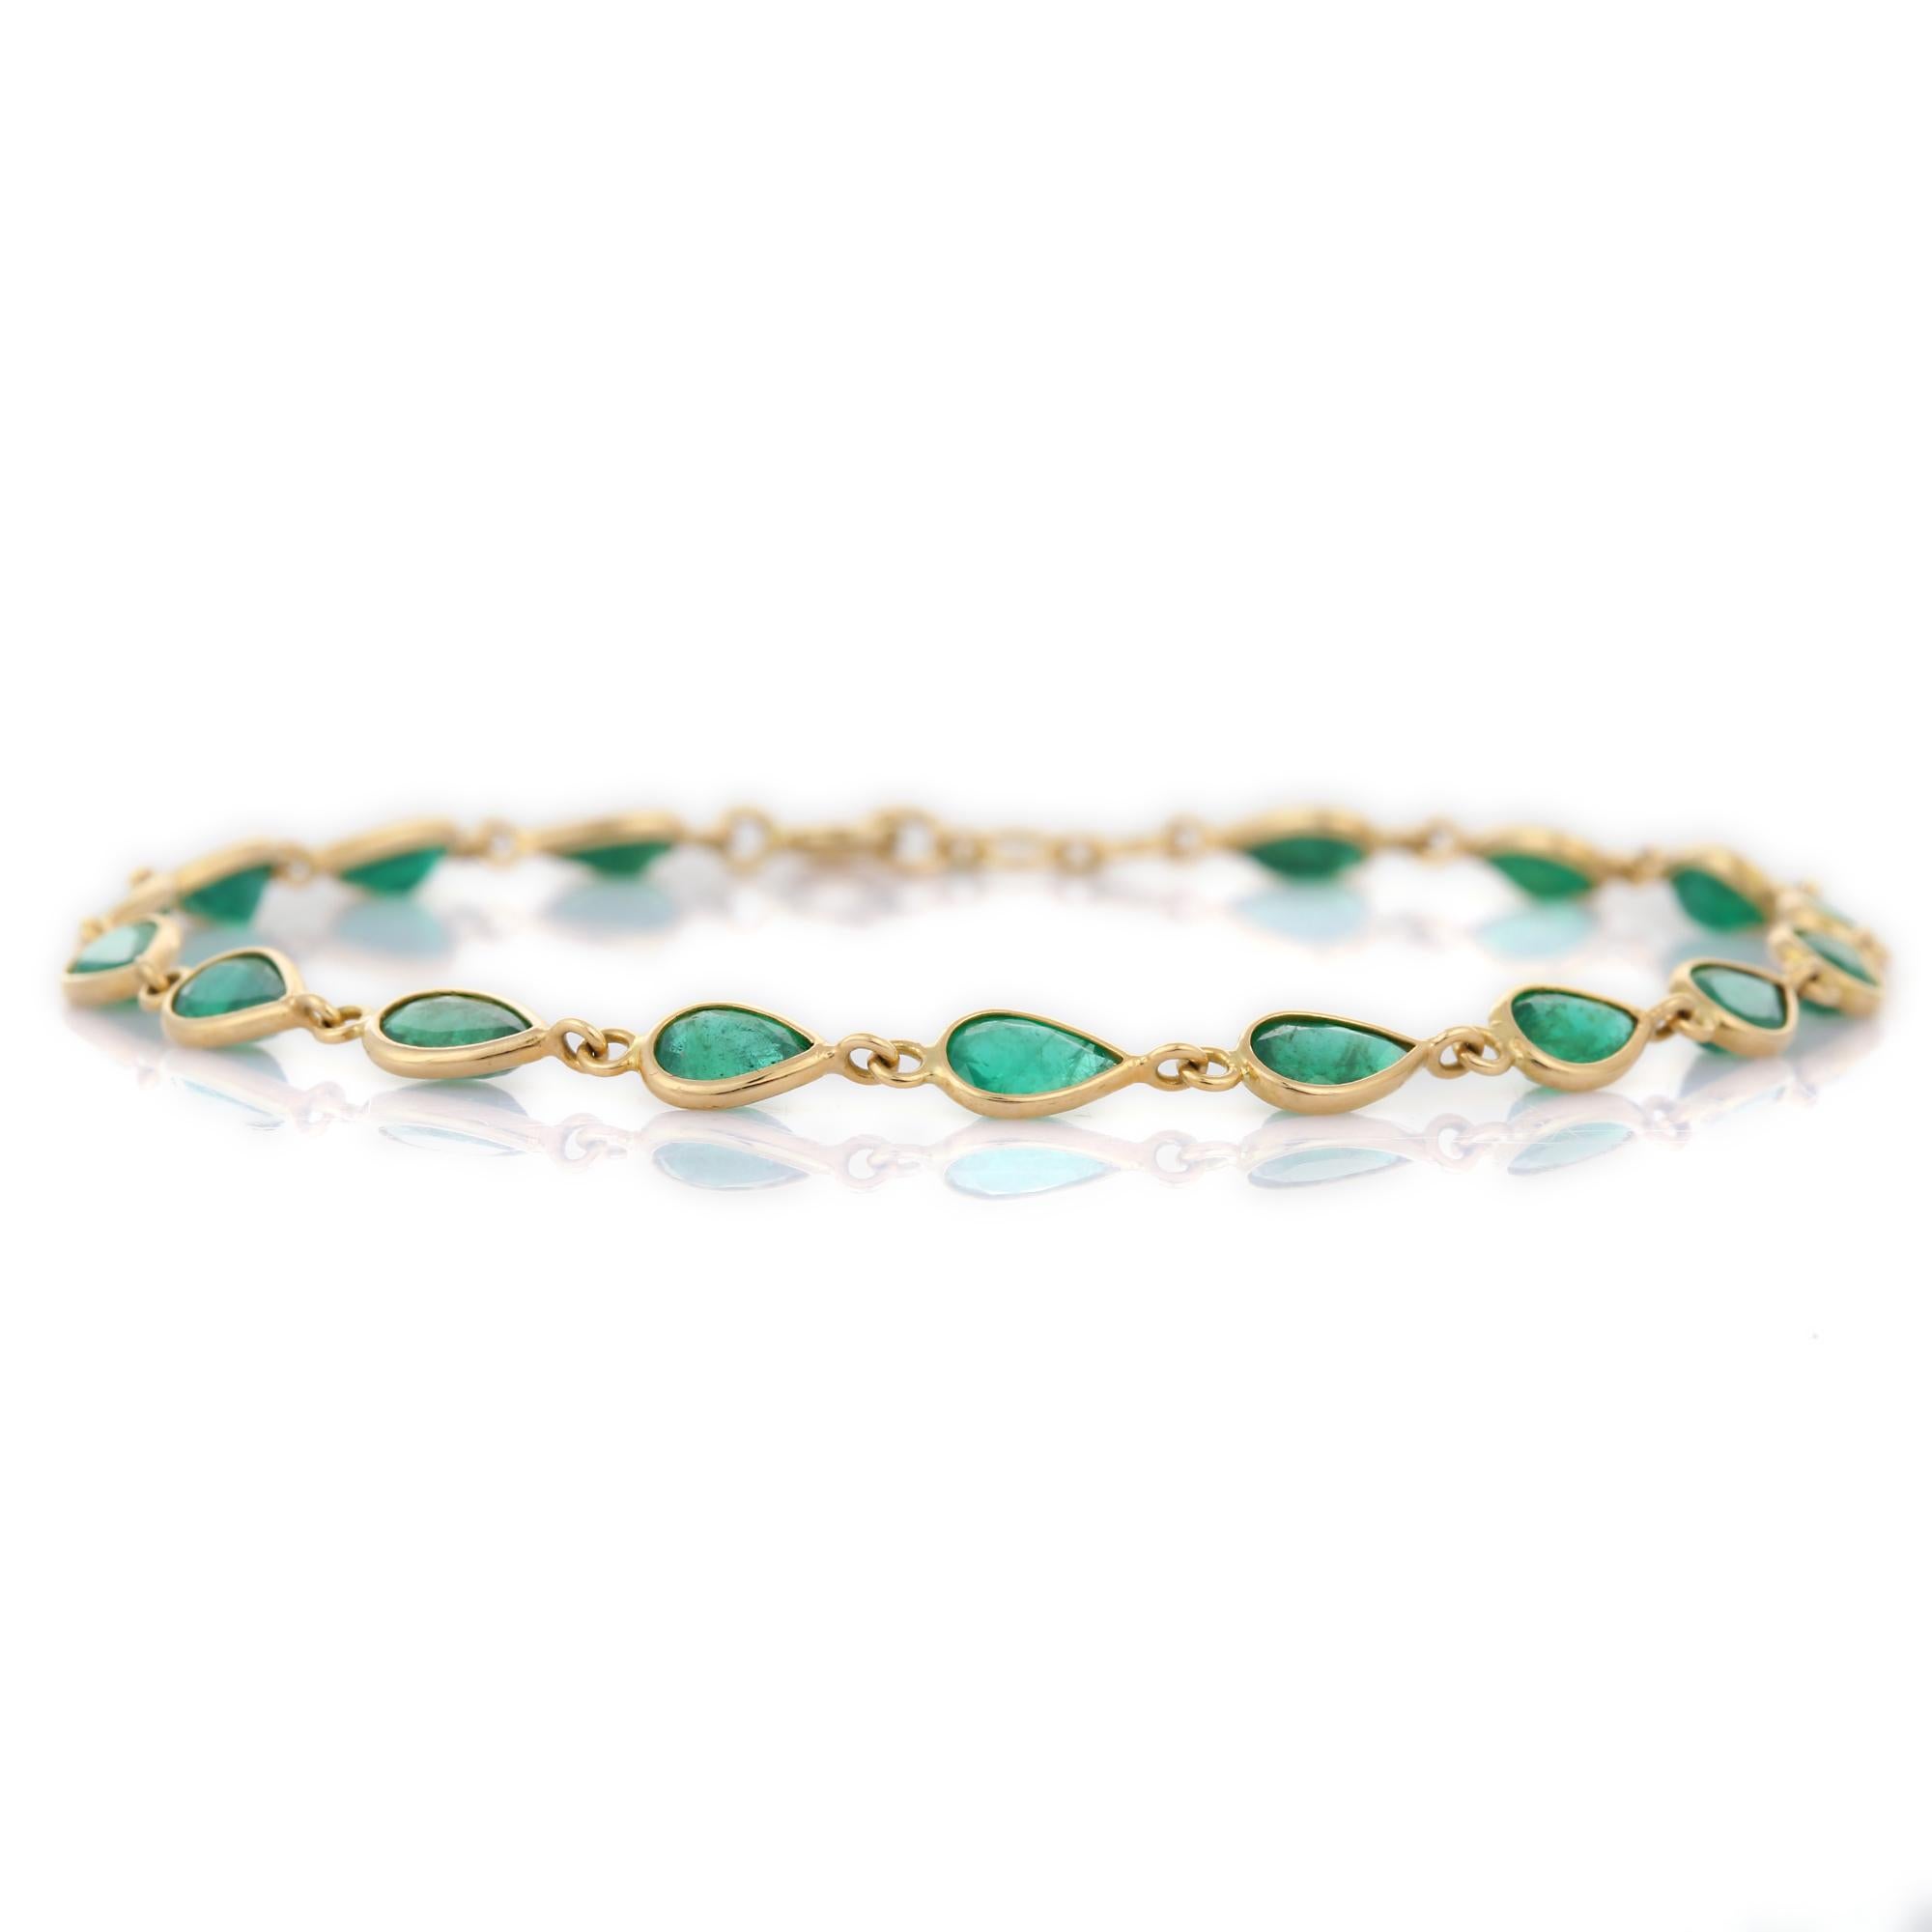 Contemporary Exquisite 5.75 ct Pear Cut Emerald Chain Bracelet Inlaid in 18K Yellow Gold For Sale